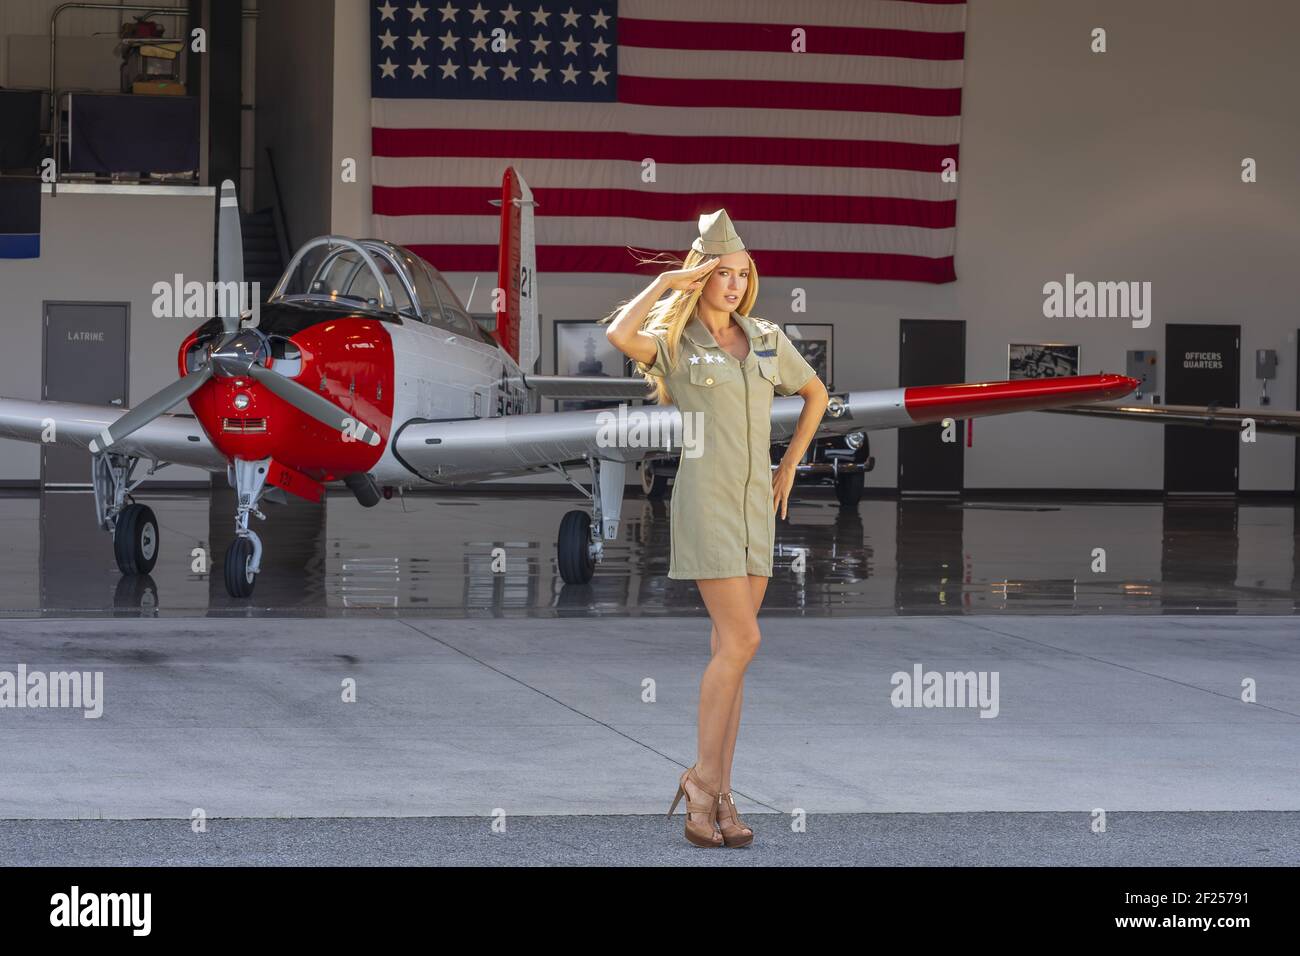 Lovely Blonde Model Posing With A Vintage World War II P-51 Mustang Stock Photo